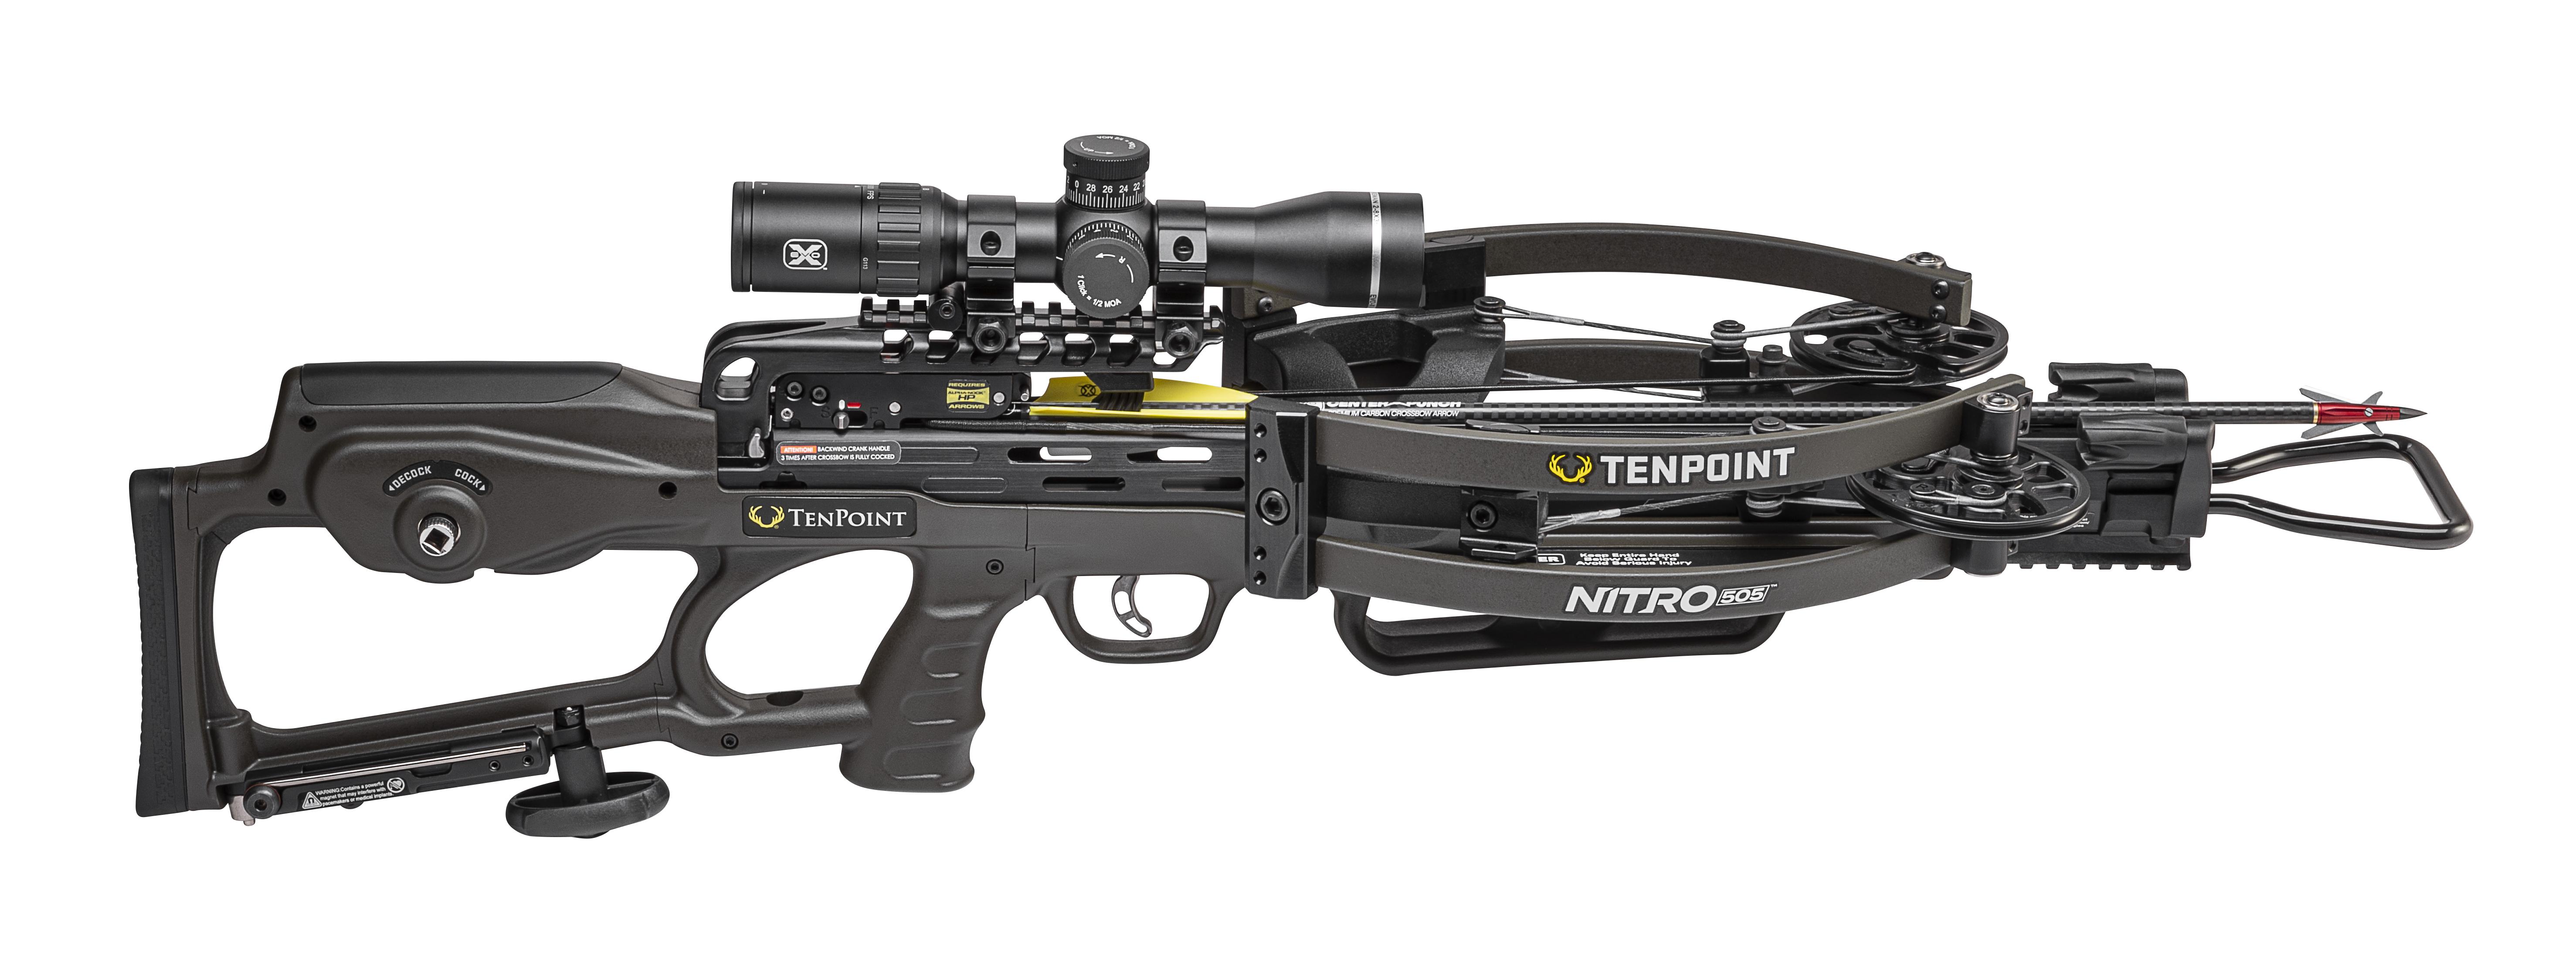 NEW TenPoint Nitro 505™: Fastest Crossbow Ever With Safe De-Cocking